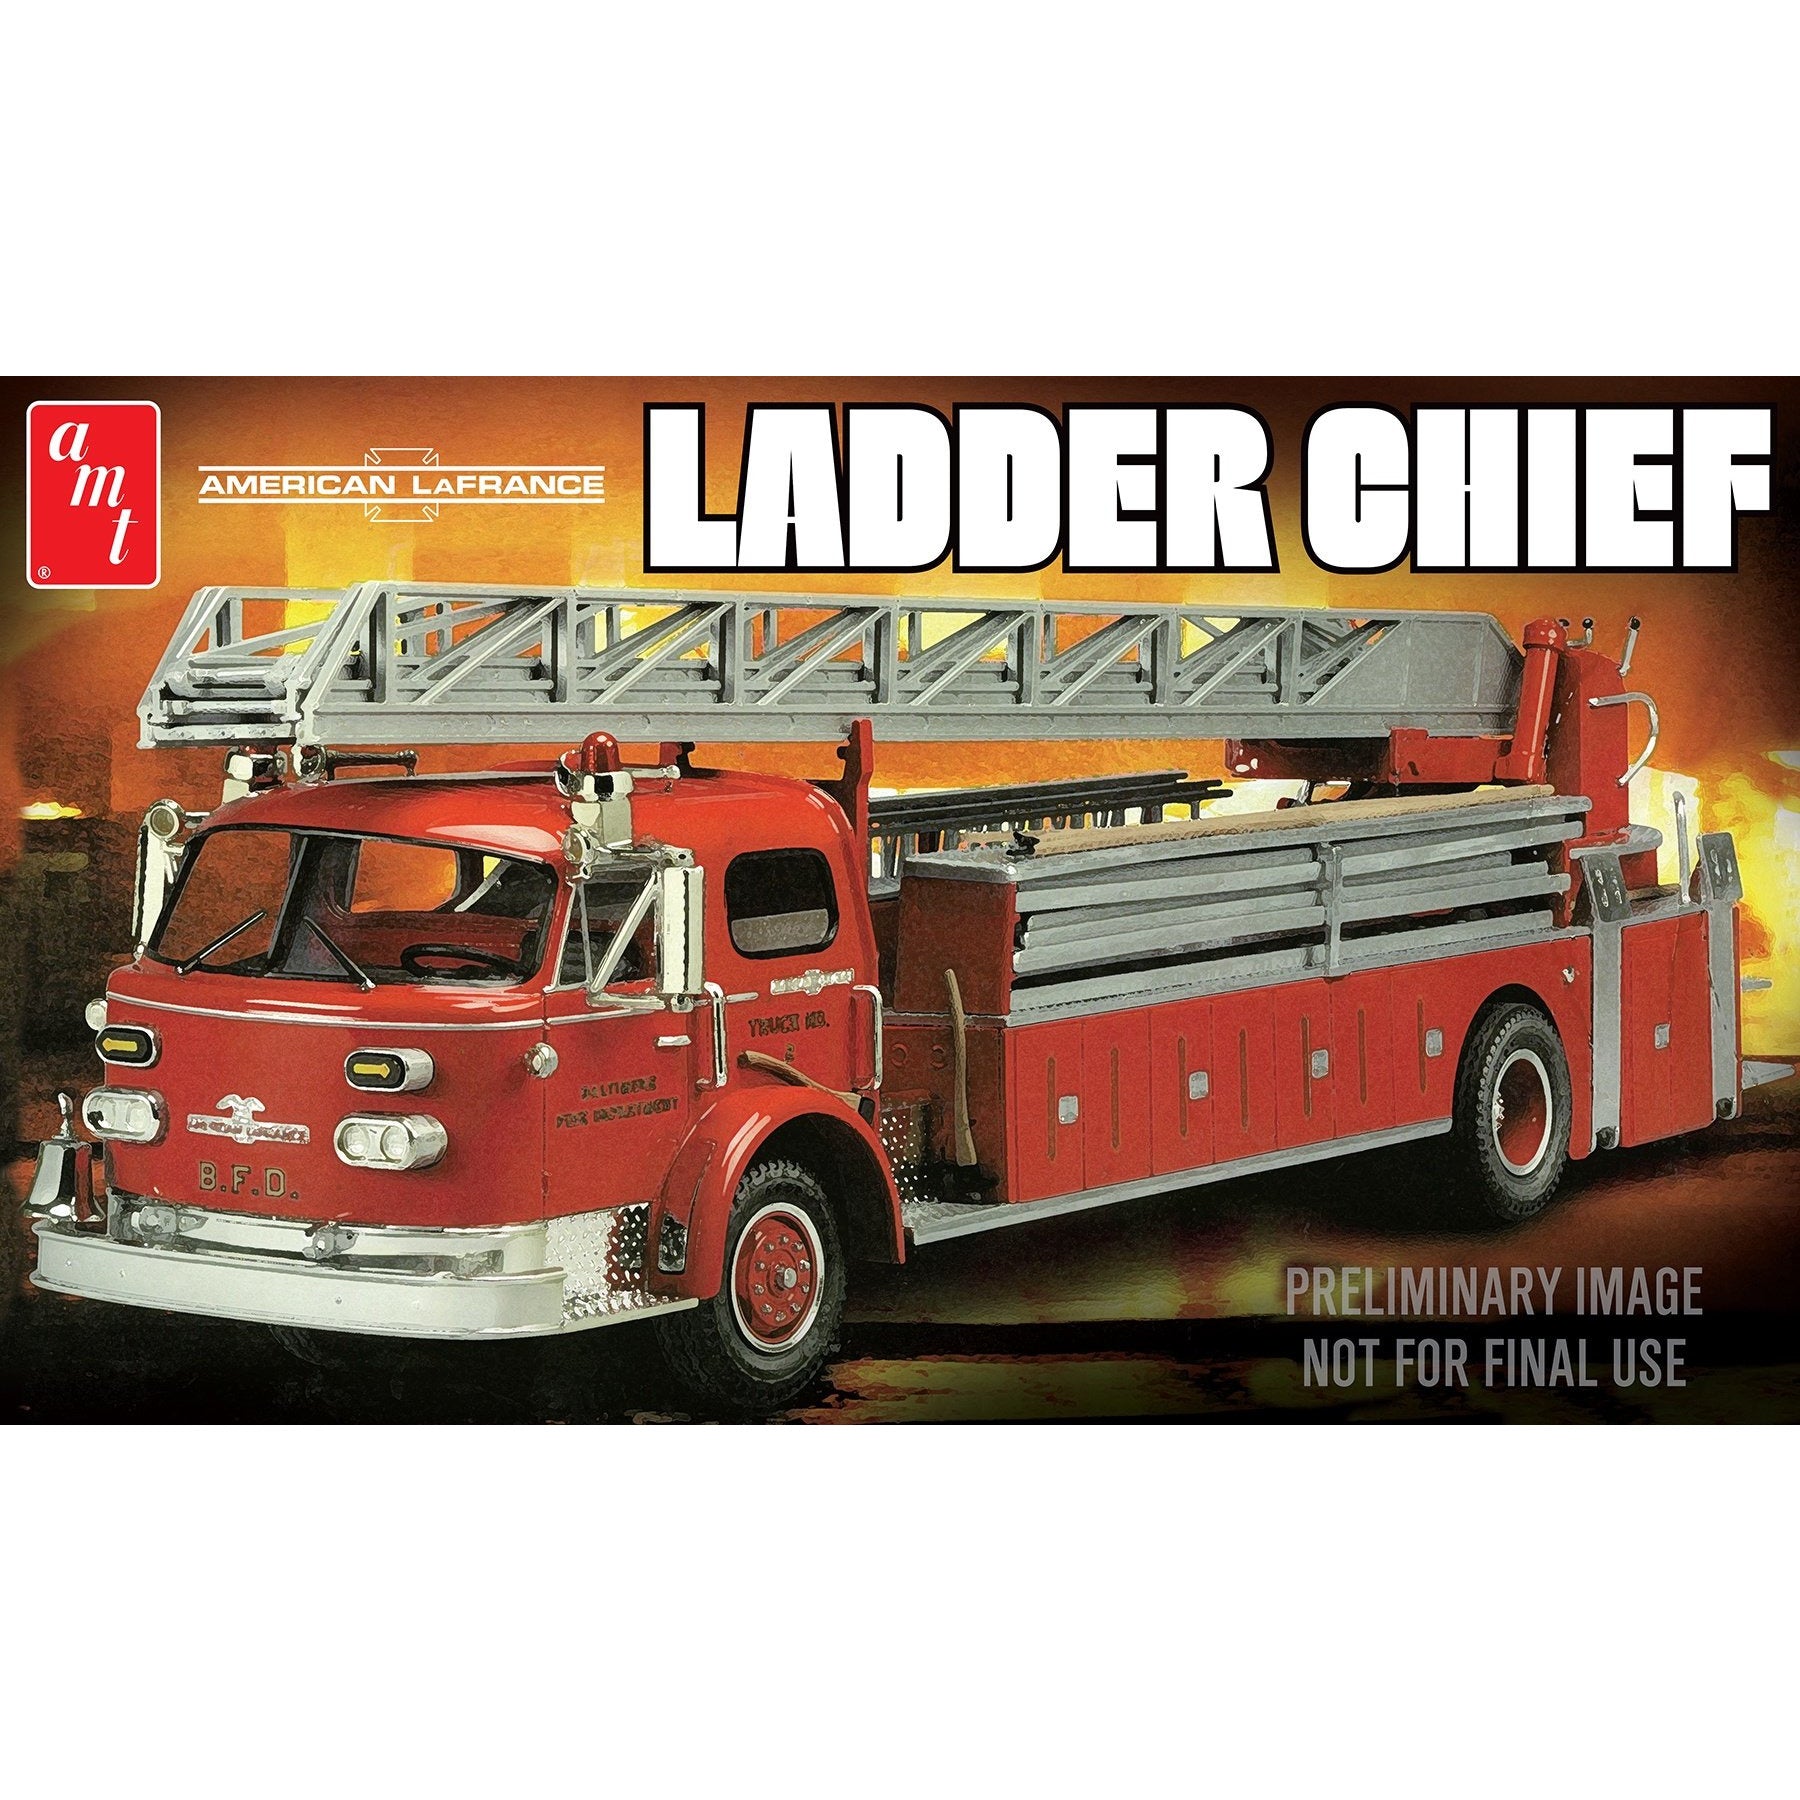 Ladder Chief Fire Engine 1/25 Model Vehicle Kit #1204 by AMT